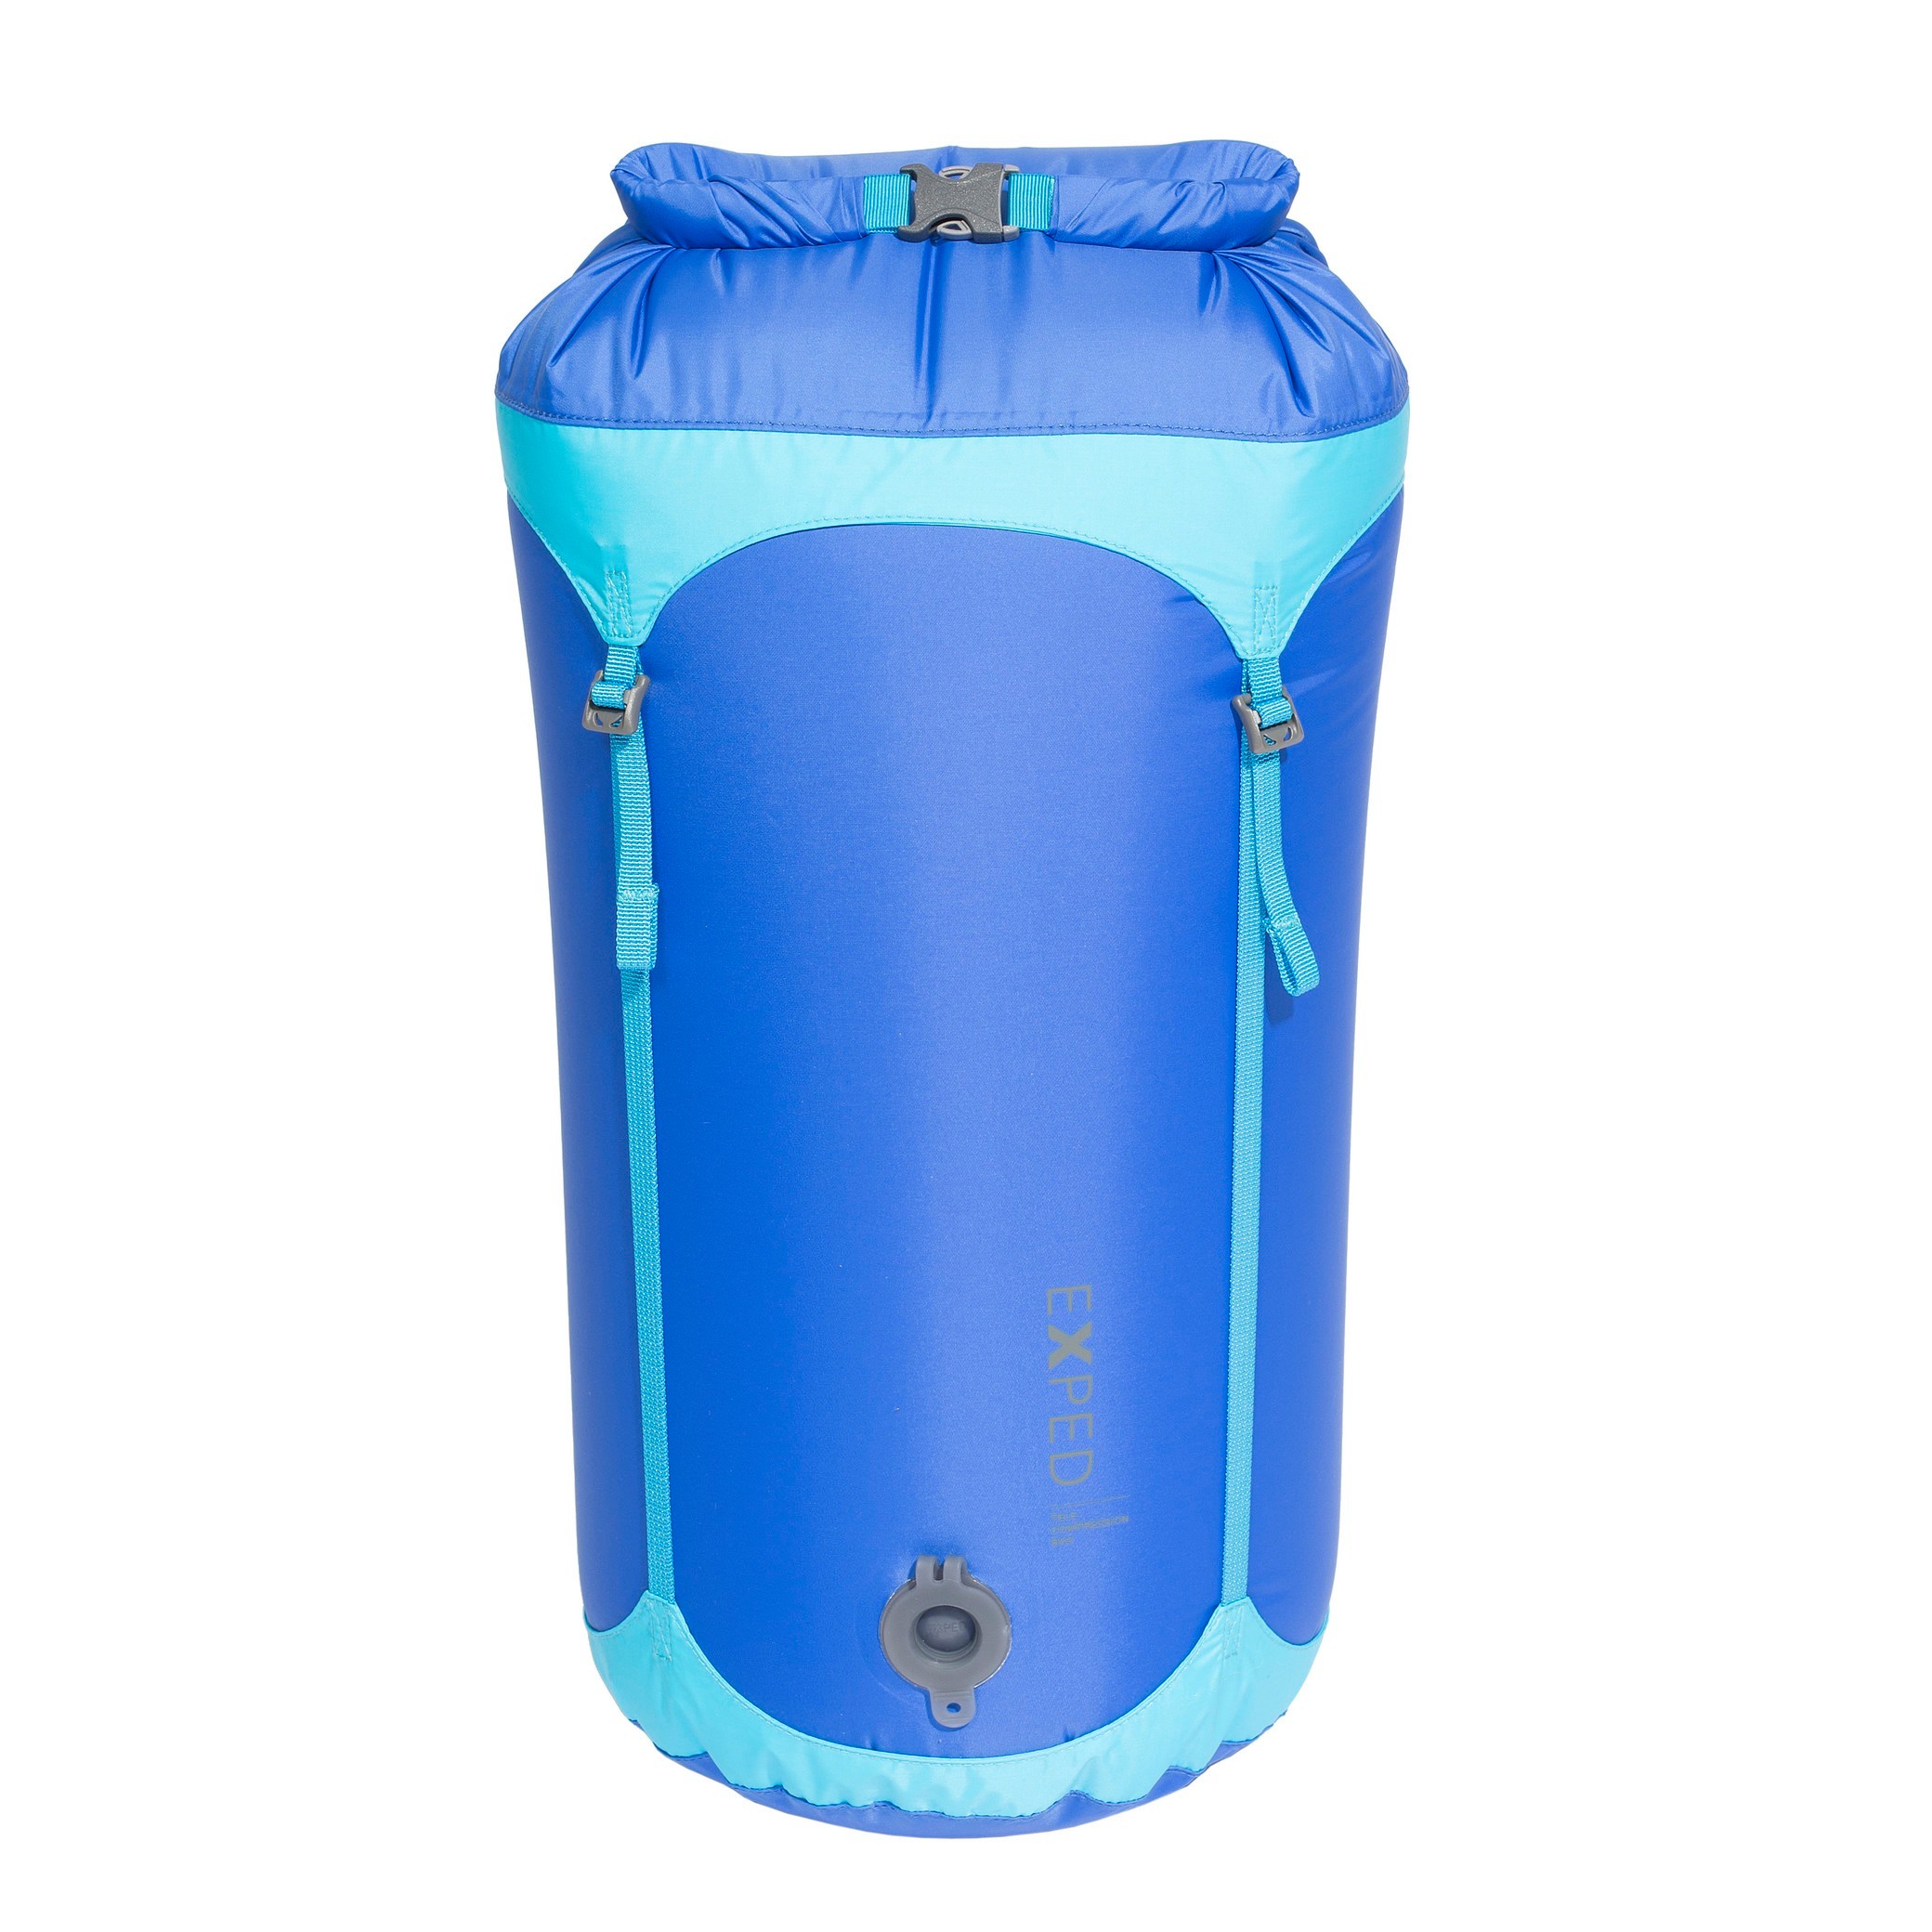 Exped Waterproof Telecompression Bag M Blue